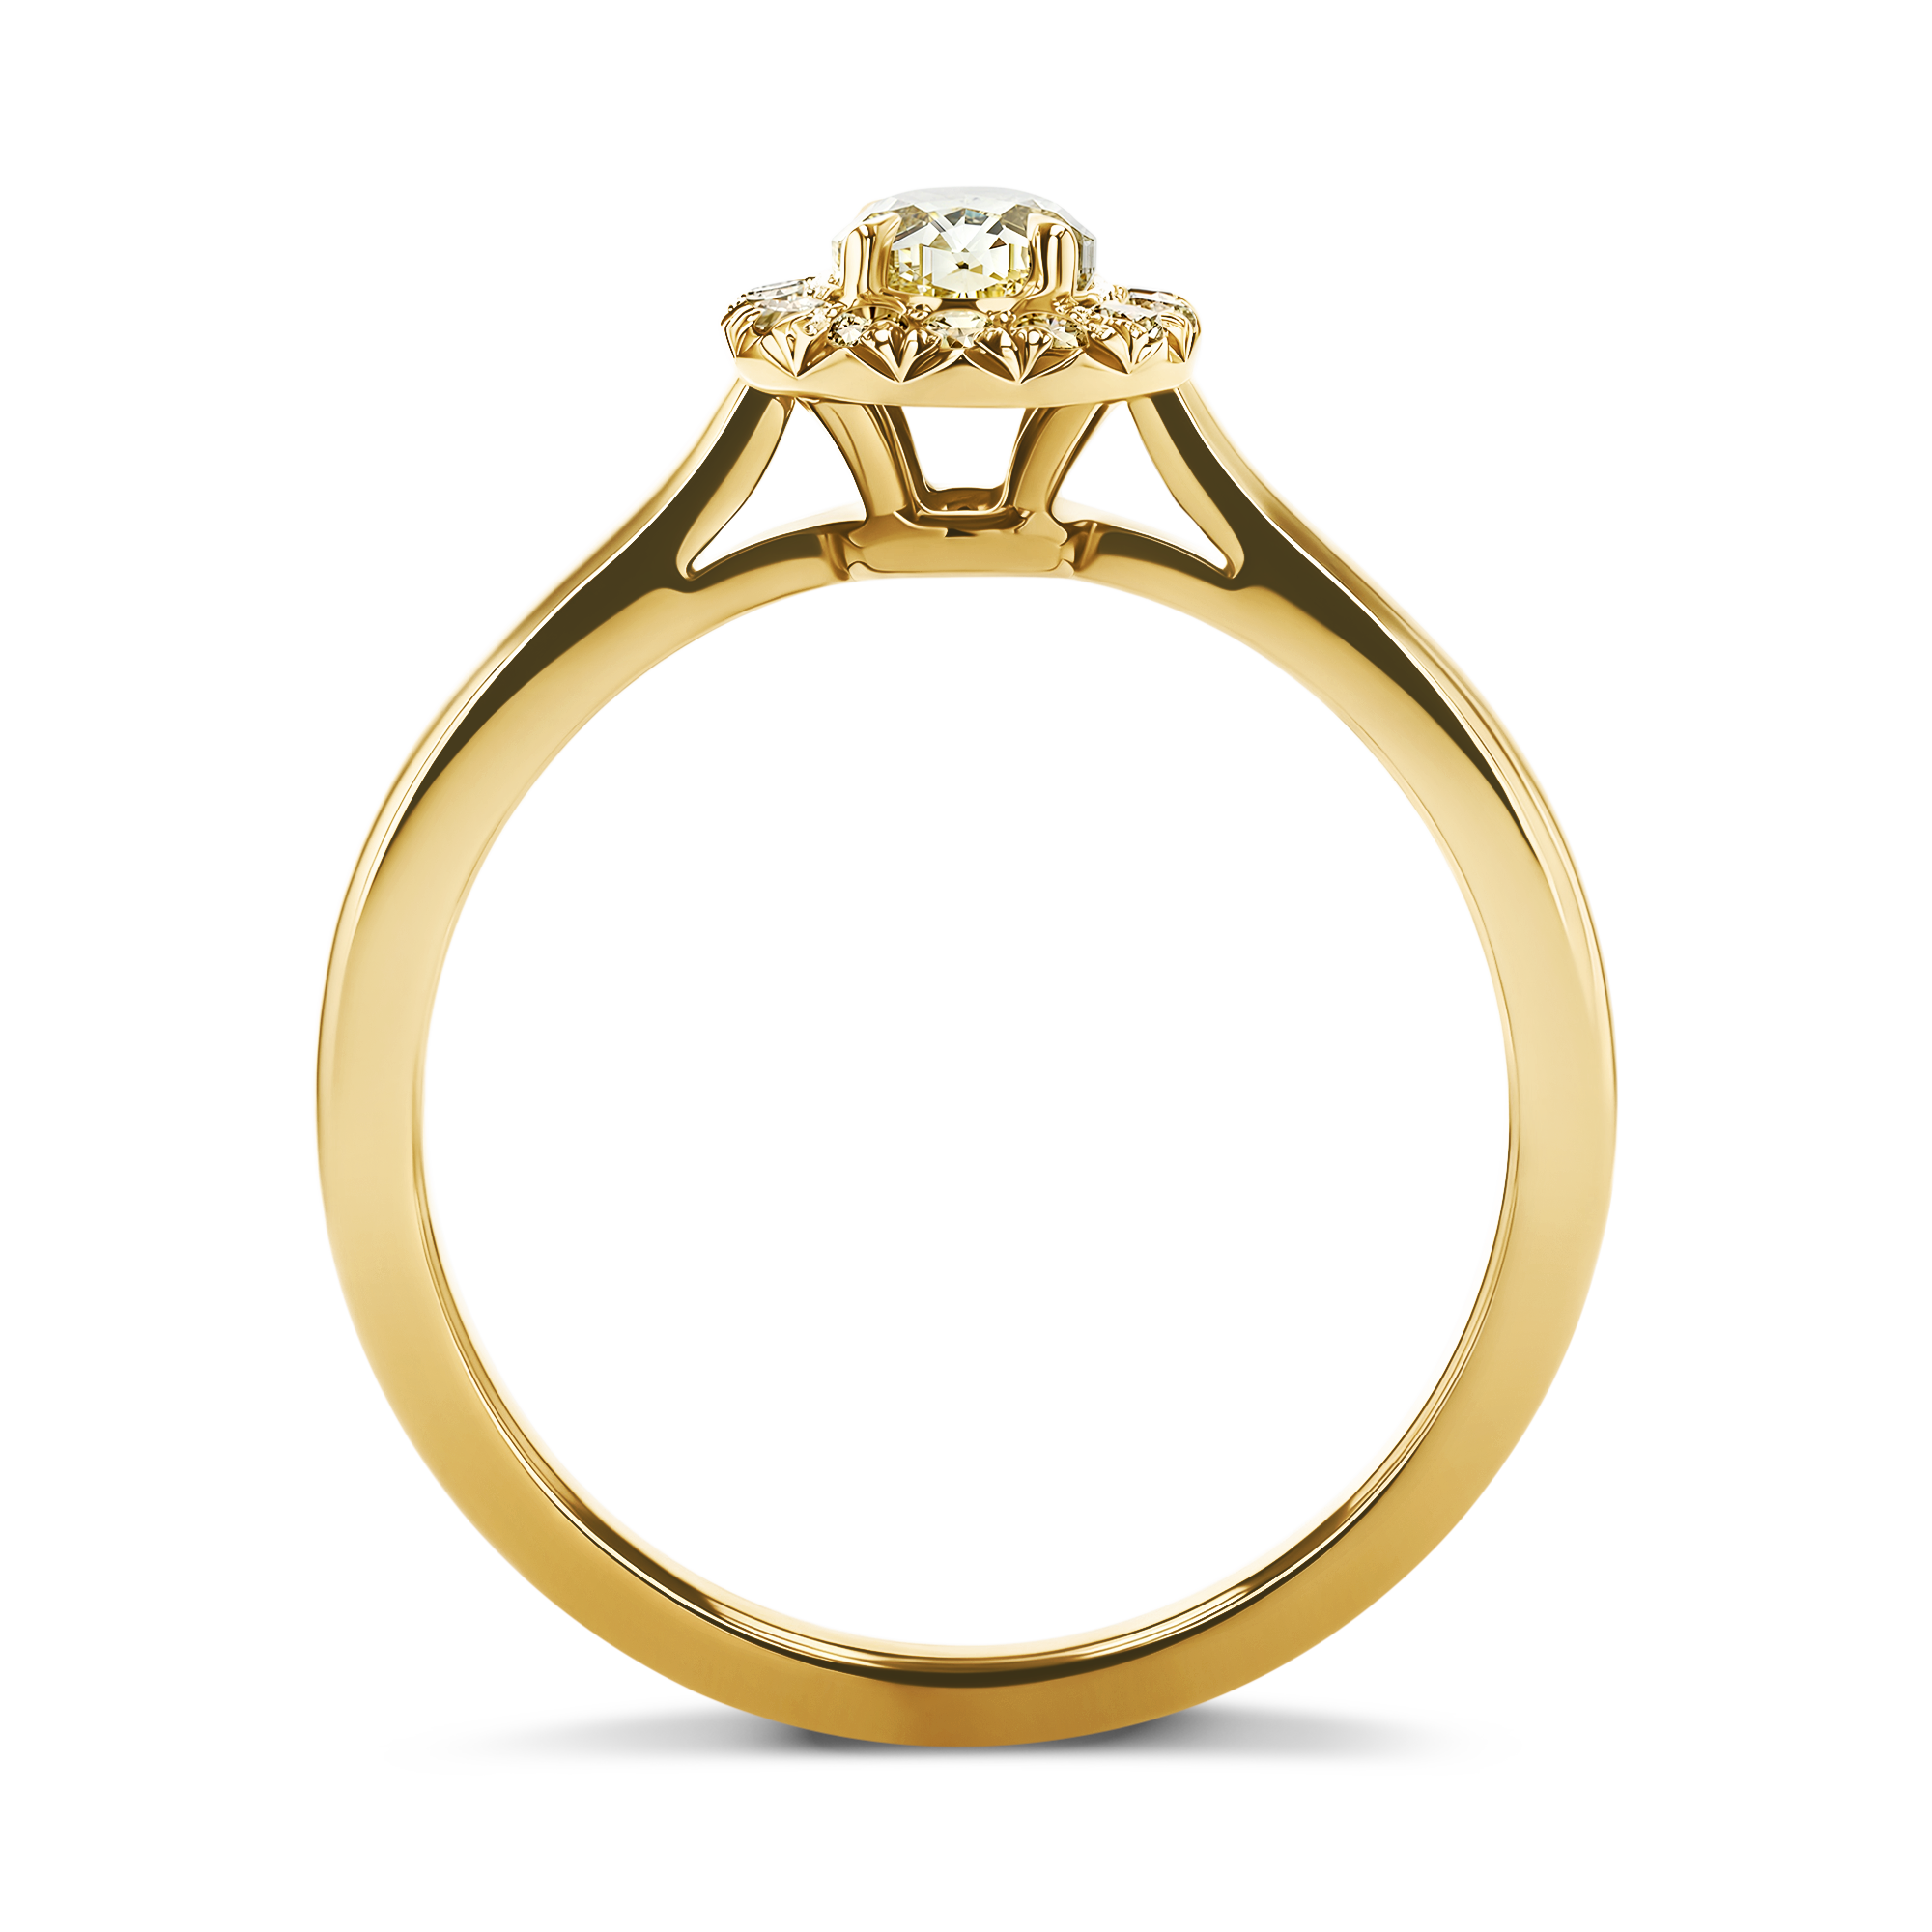 Celestial 0.72ct Fancy Yellow Diamond Cluster Ring Oval Cut, Claw Set_3